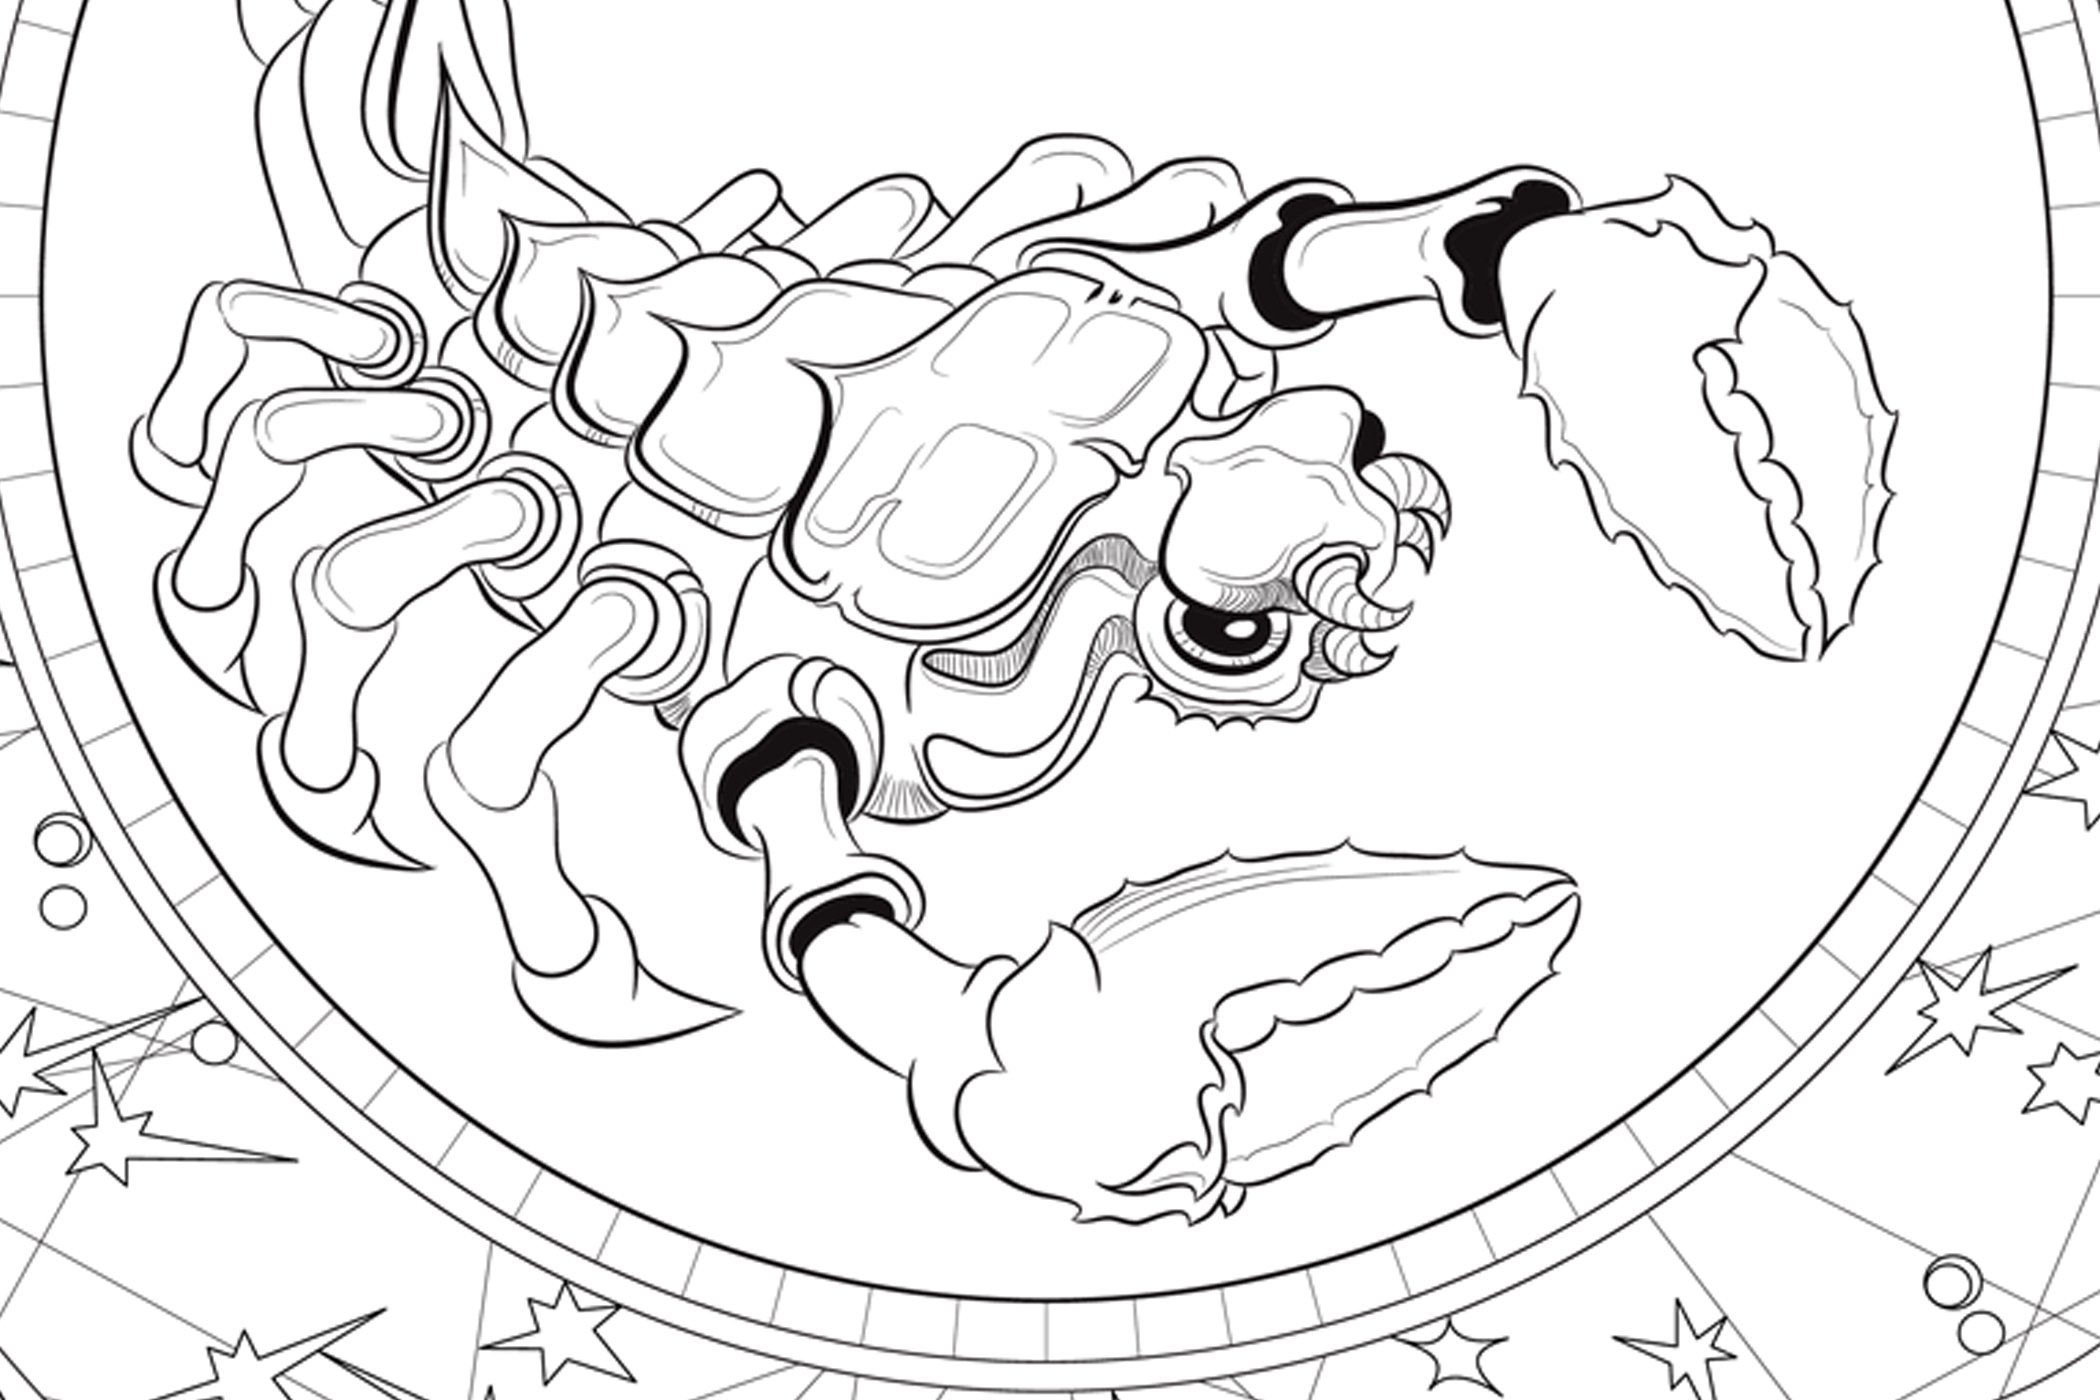 Scorpio zodiac sign astrology printable coloring pages